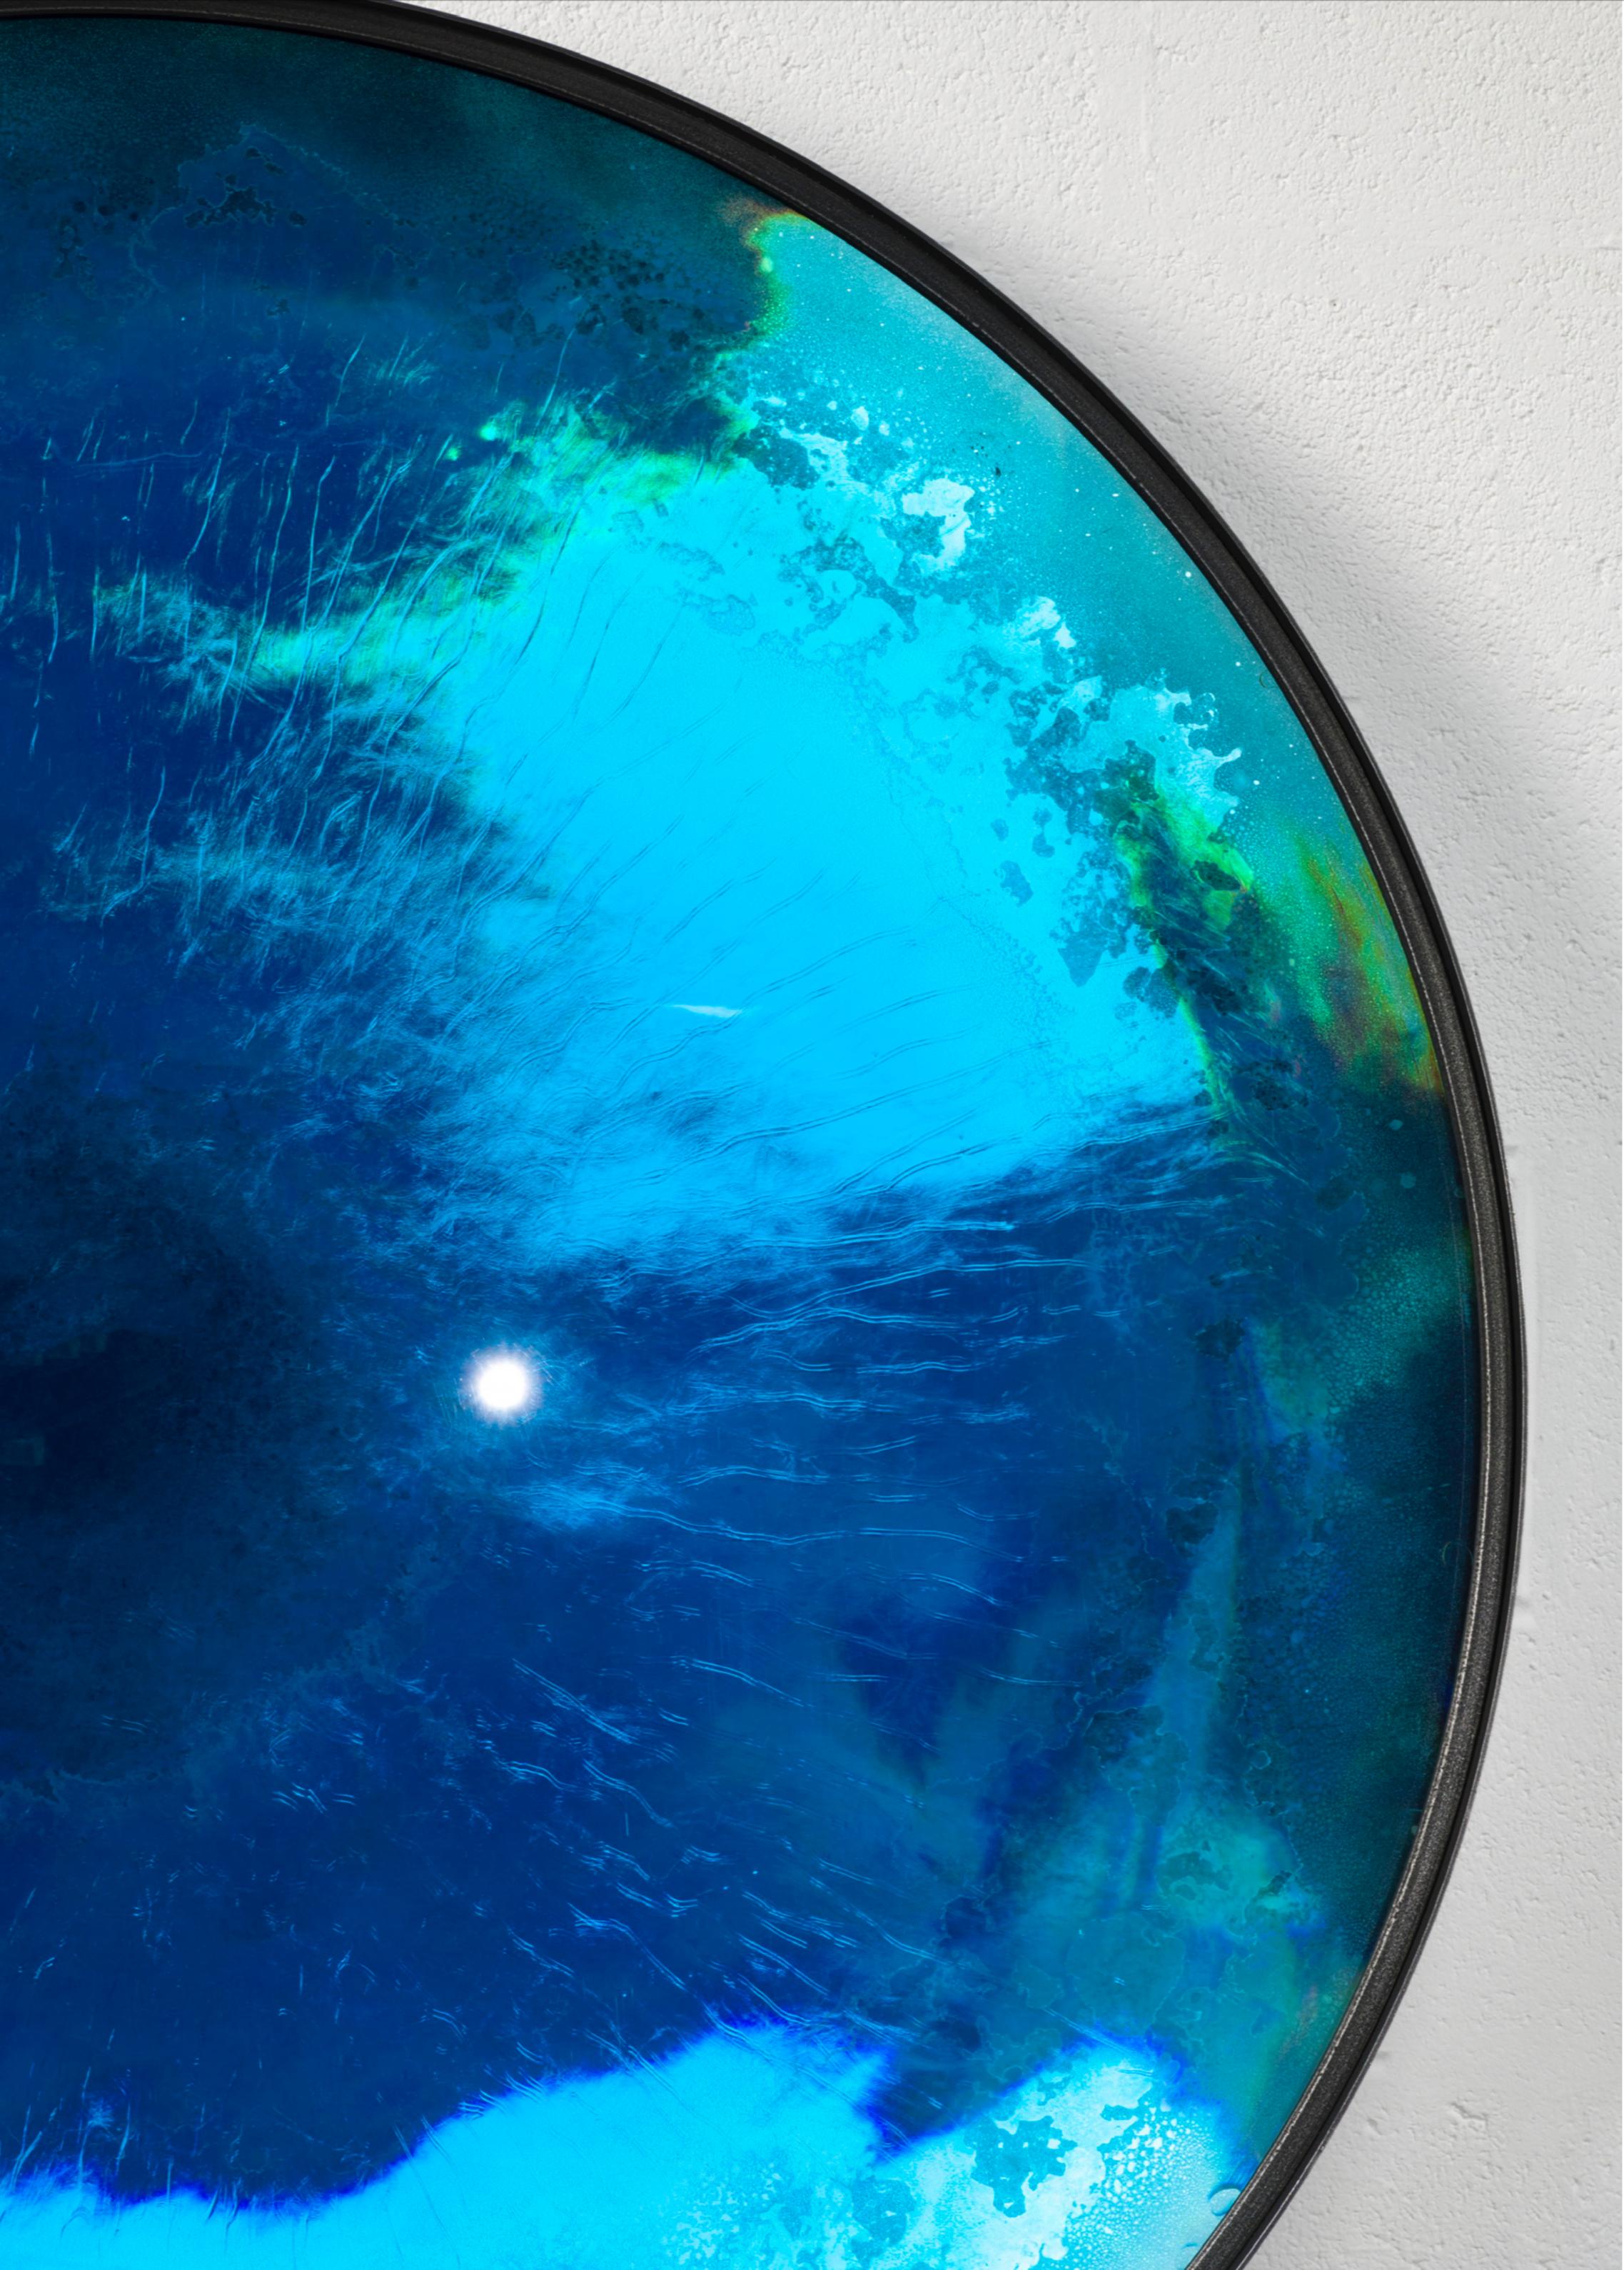 Aegean Iris mirror by Tom Palmer
Dimensions: D 140 x H 5 cm
Mterials: Glass, Resin
Also Available: Other sizes and variations available.

The Iris mirrors are hand cast in a high grade Polyurethane industrial resin that can be tinted to almost